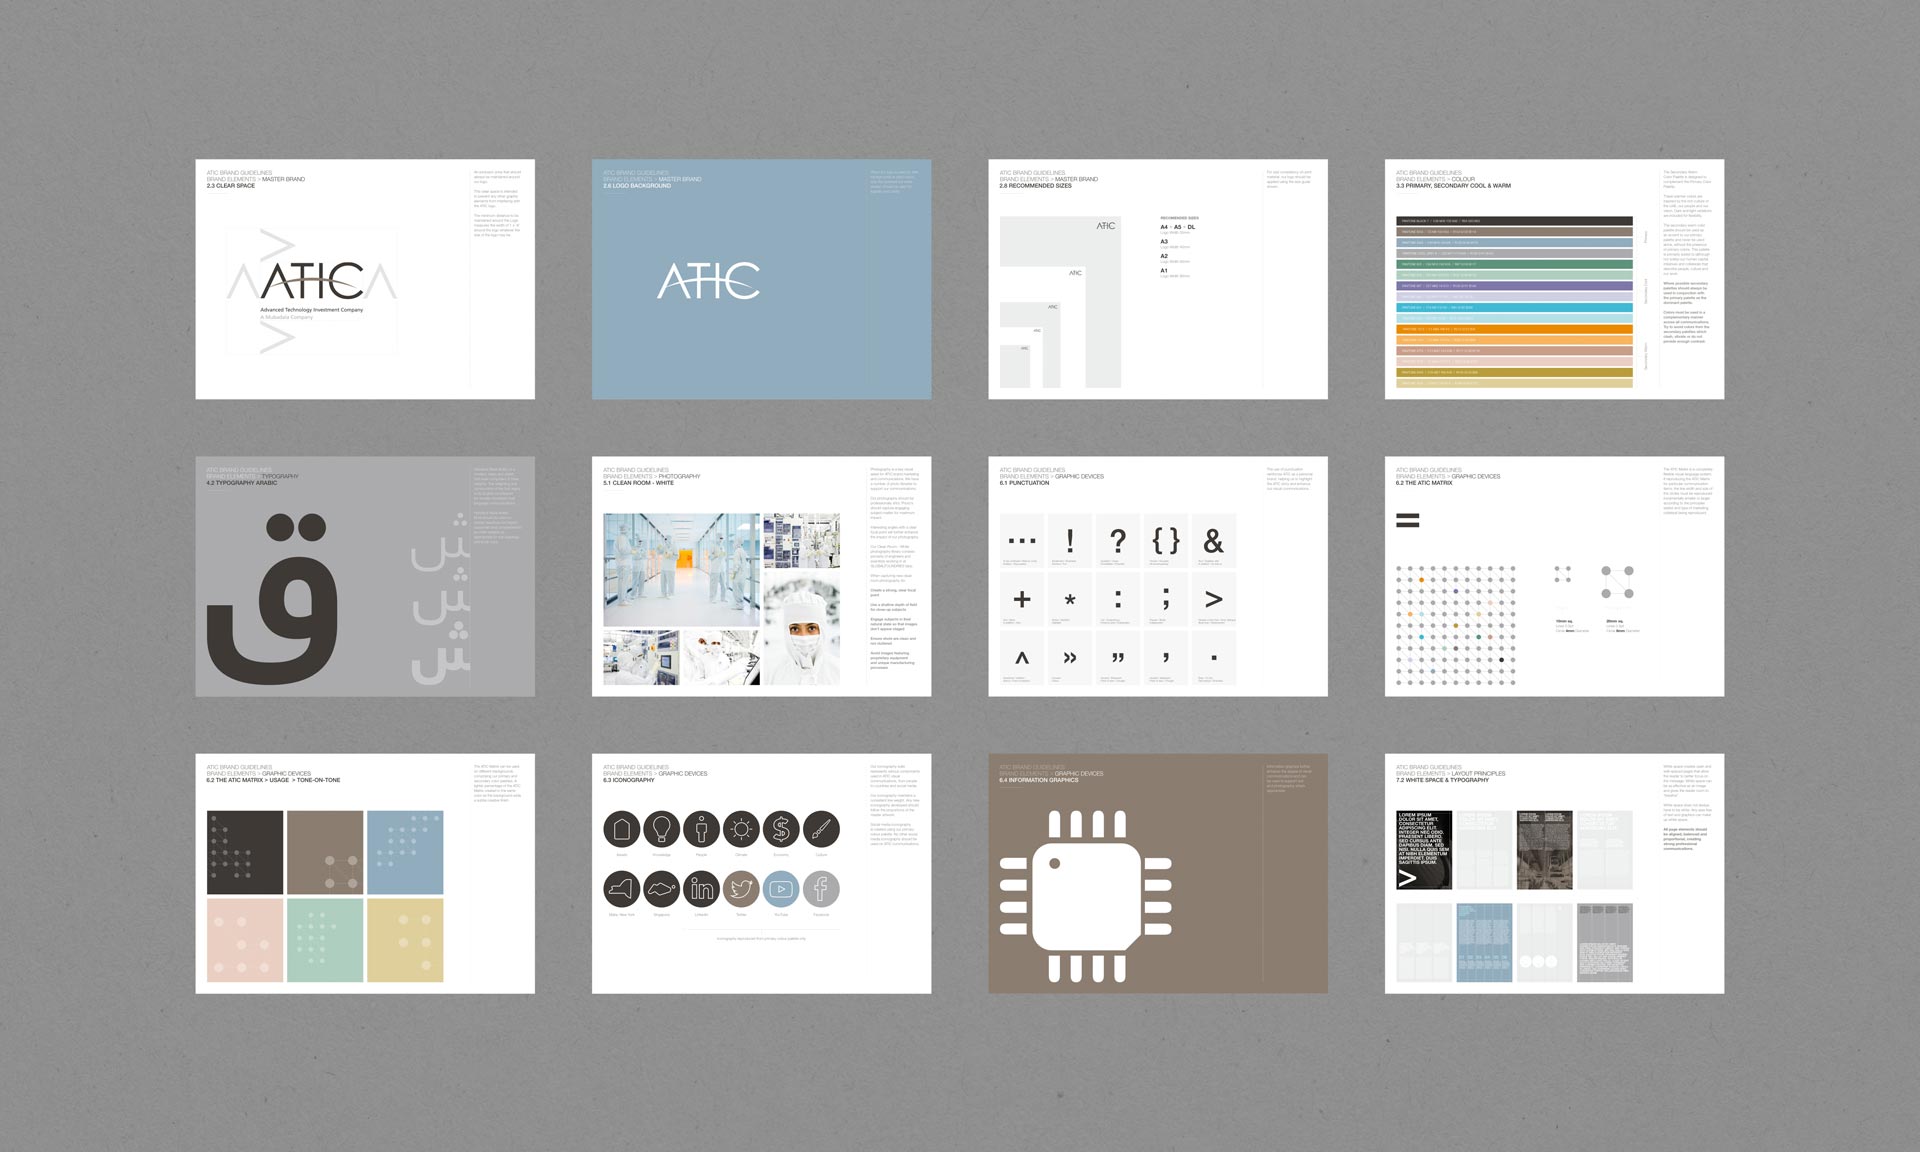 ATIC Brand Guidelines